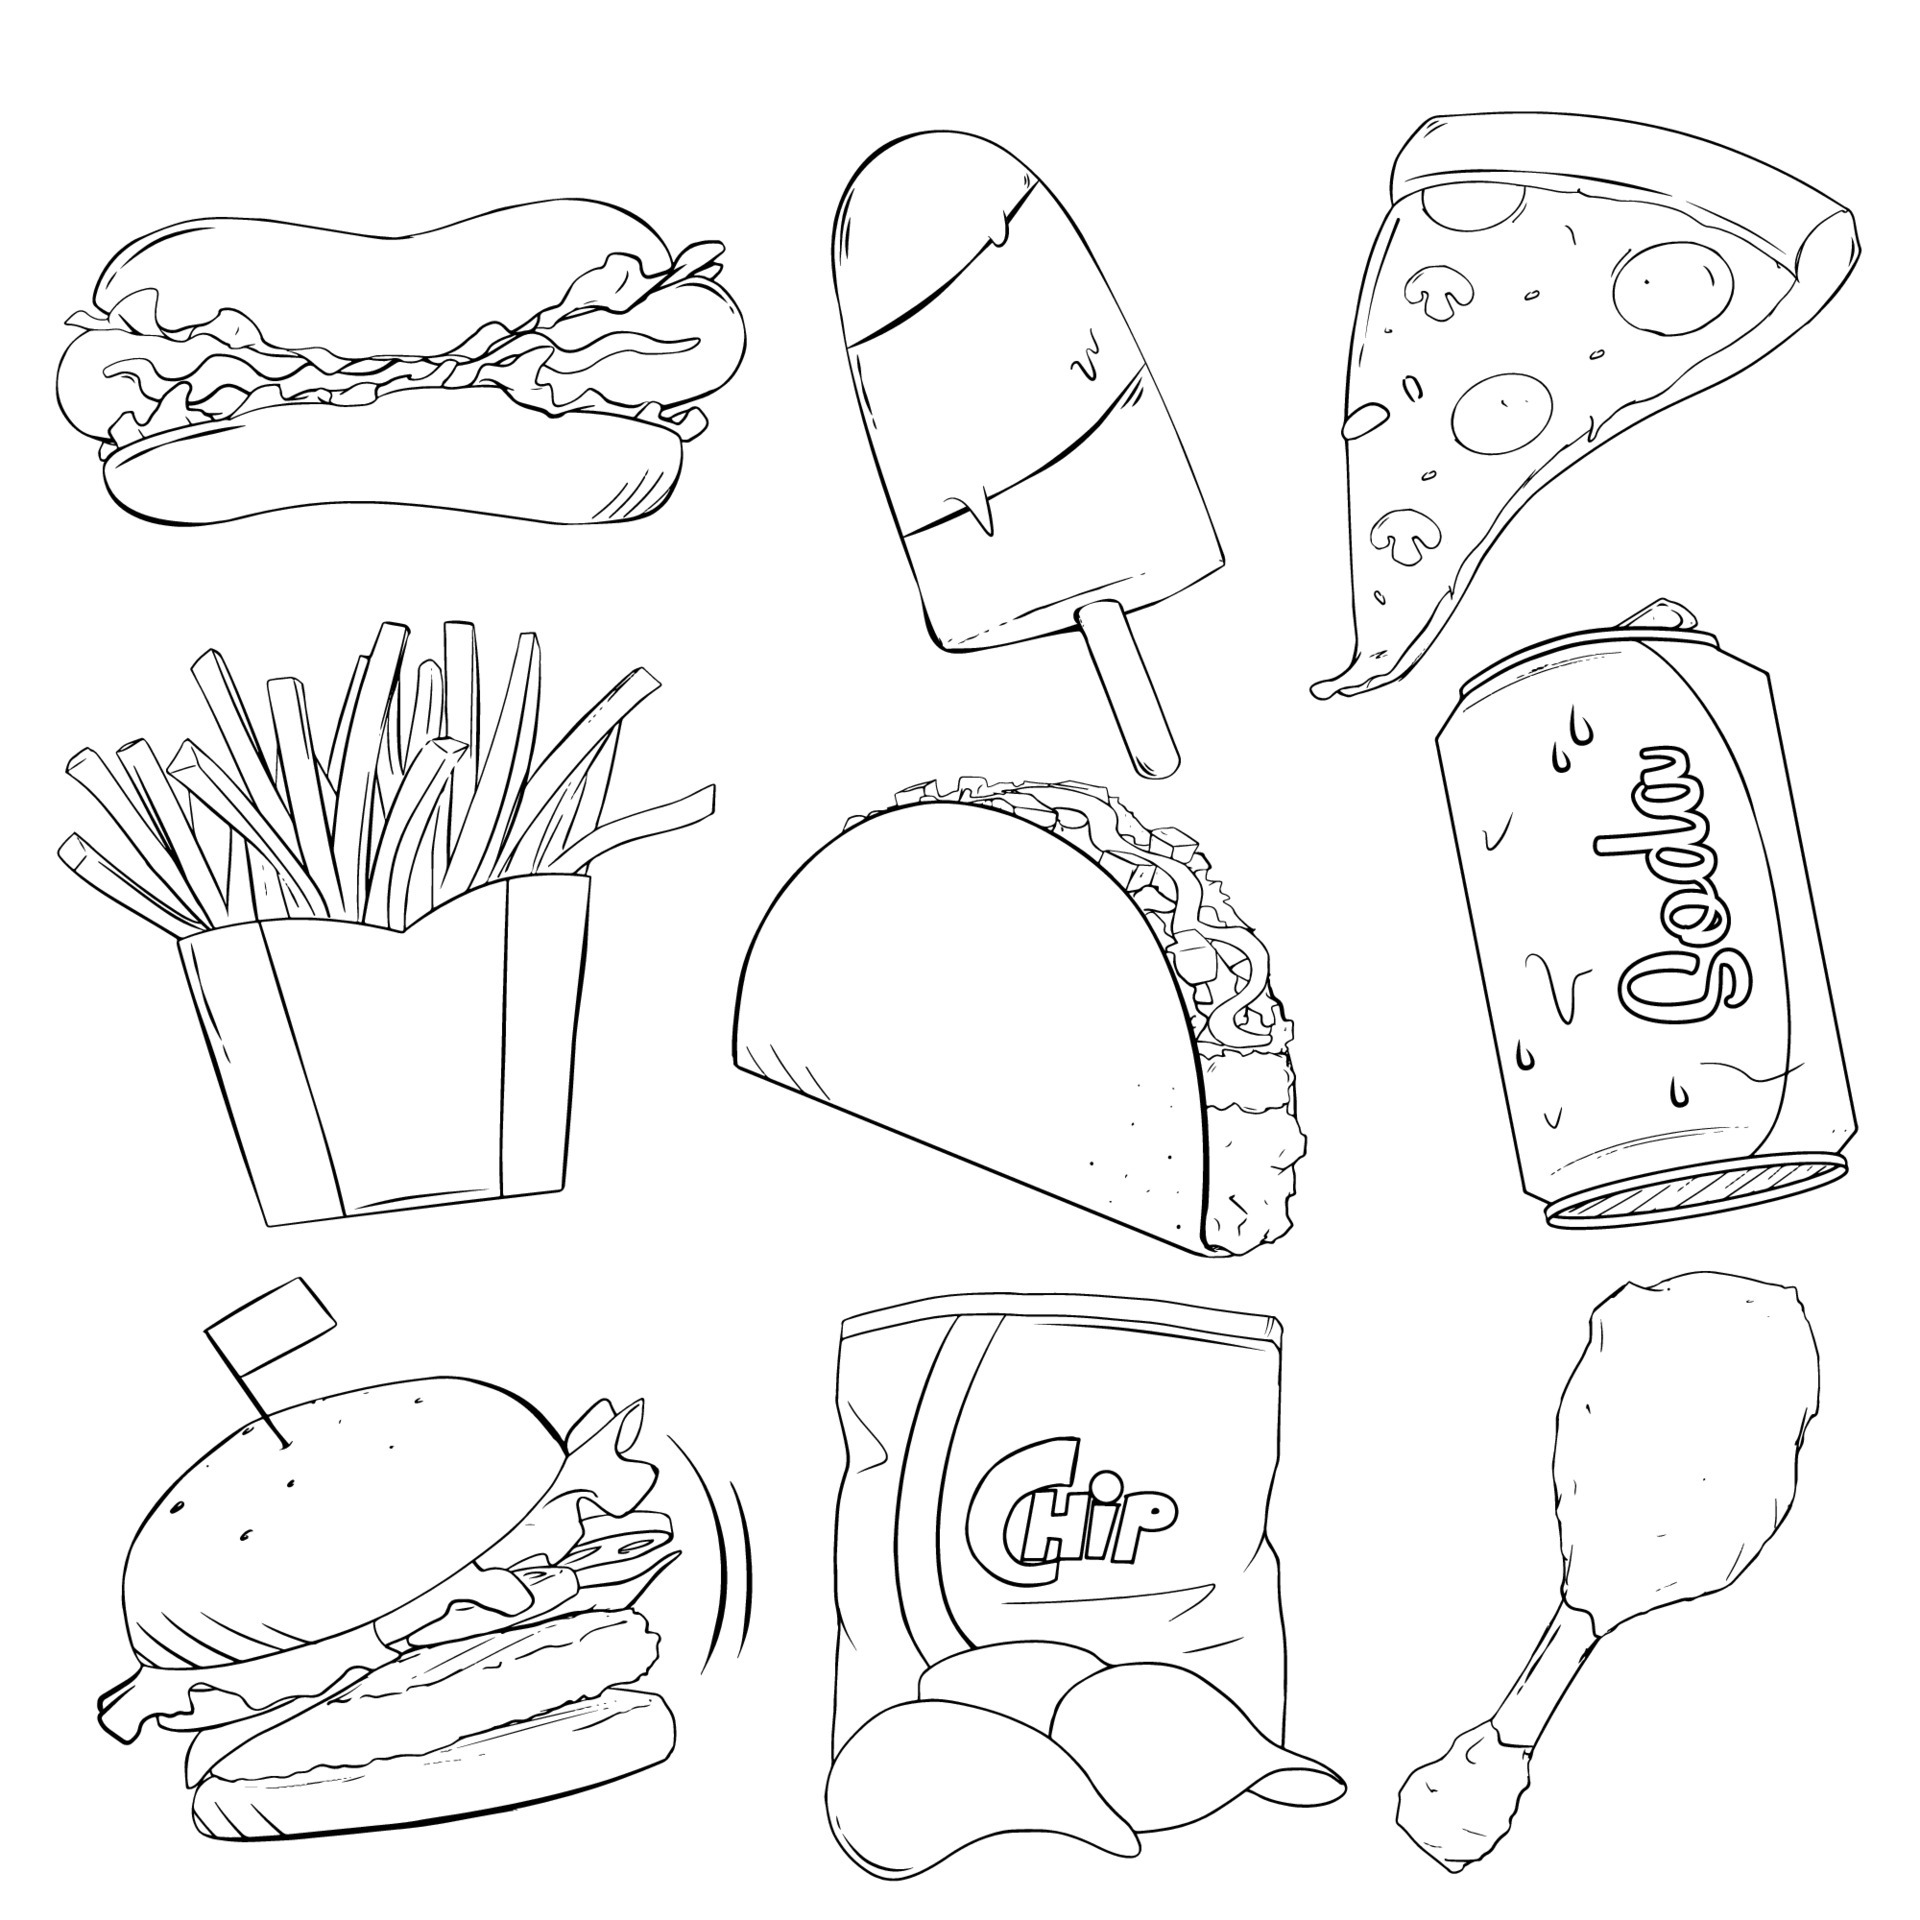 how to draw unhealthy food/junk food drawing - YouTube-saigonsouth.com.vn